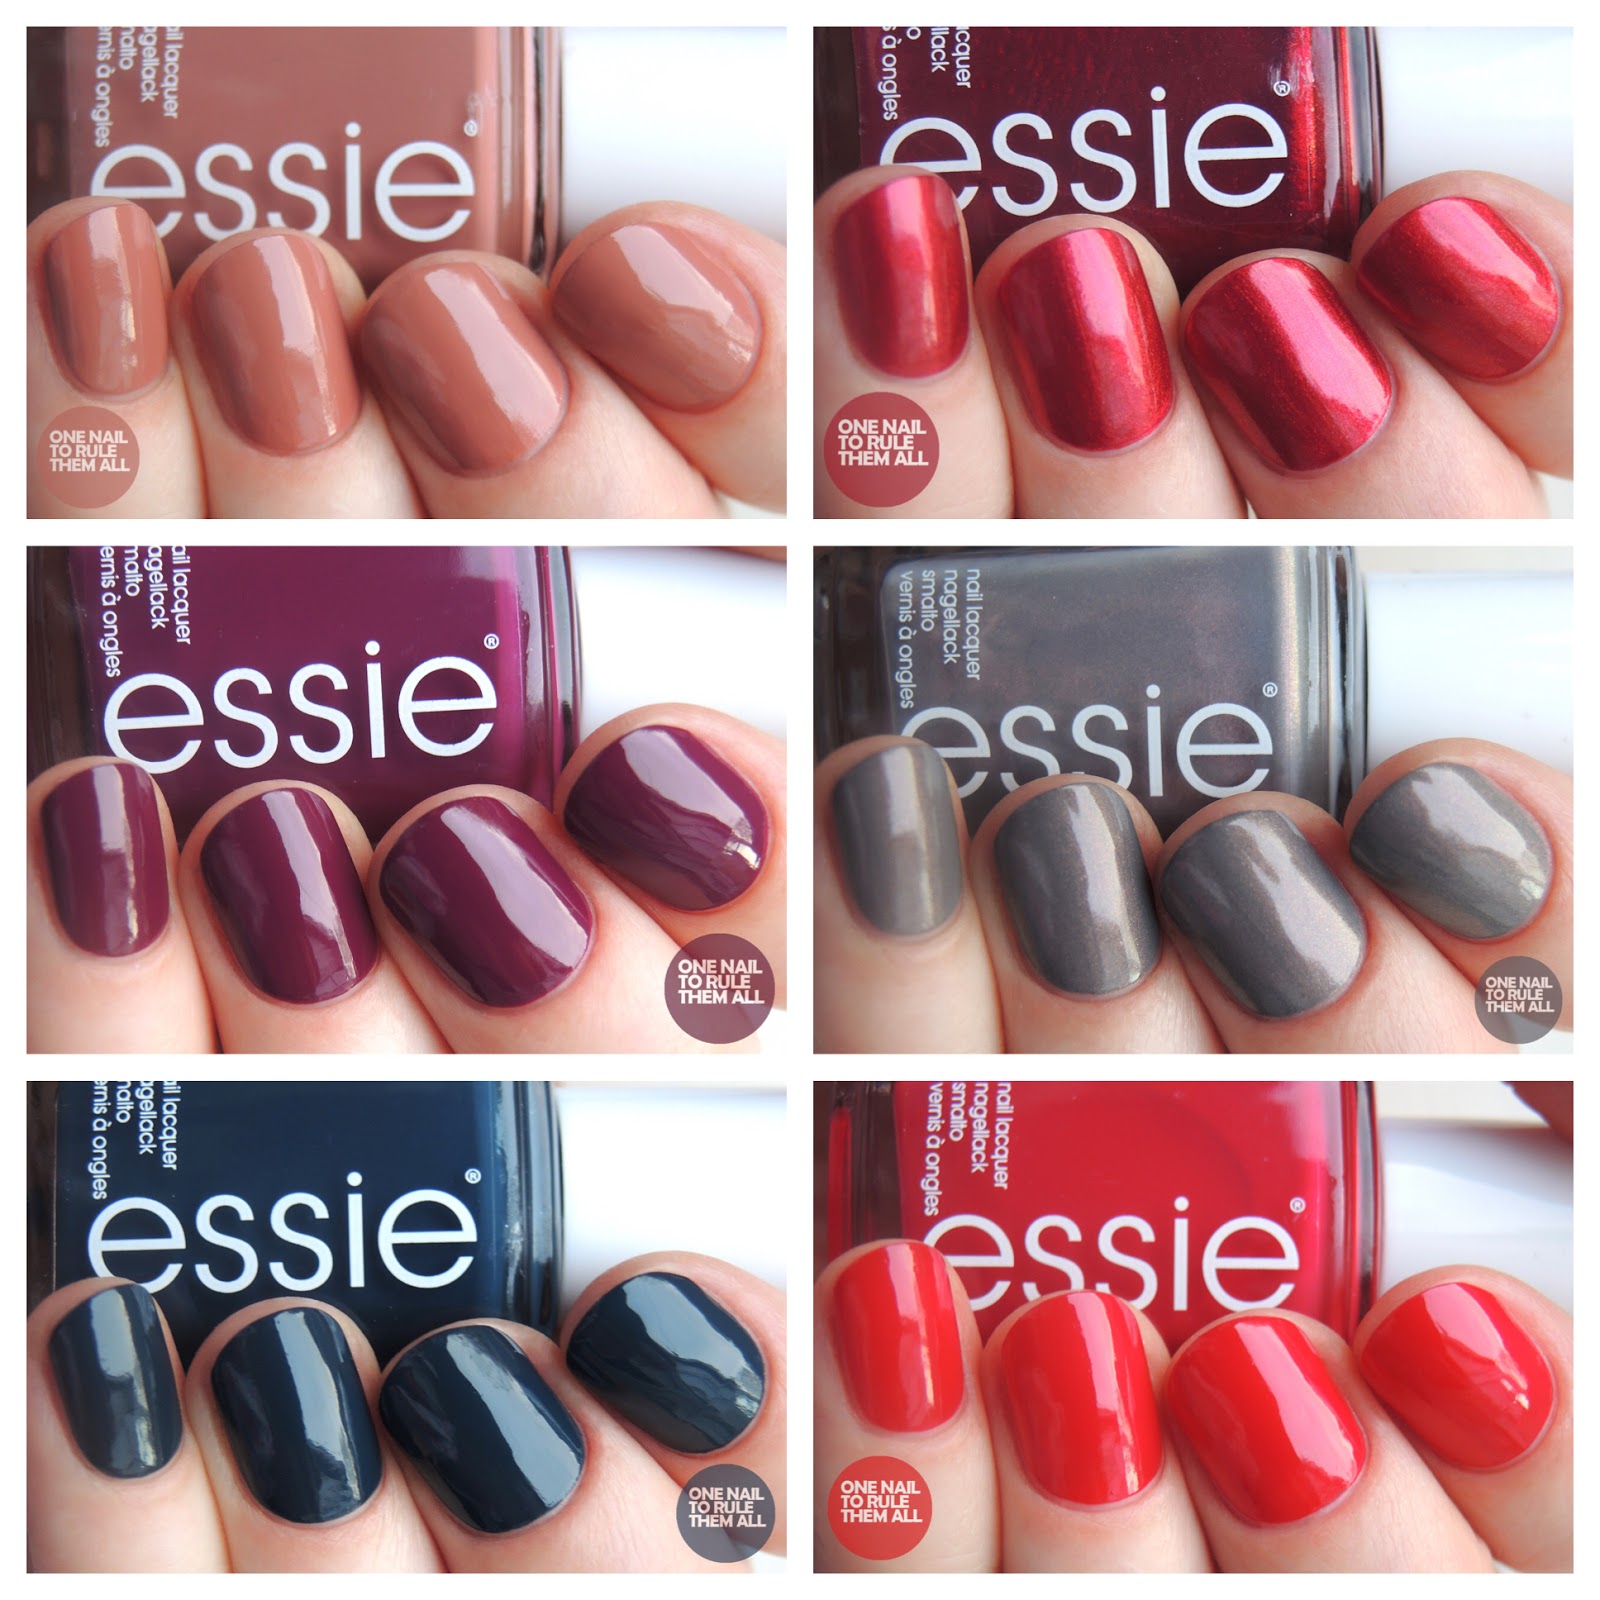 Essie Winter 2017 Collection review + swatches | One Nail To Rule Them All  | Bloglovin'